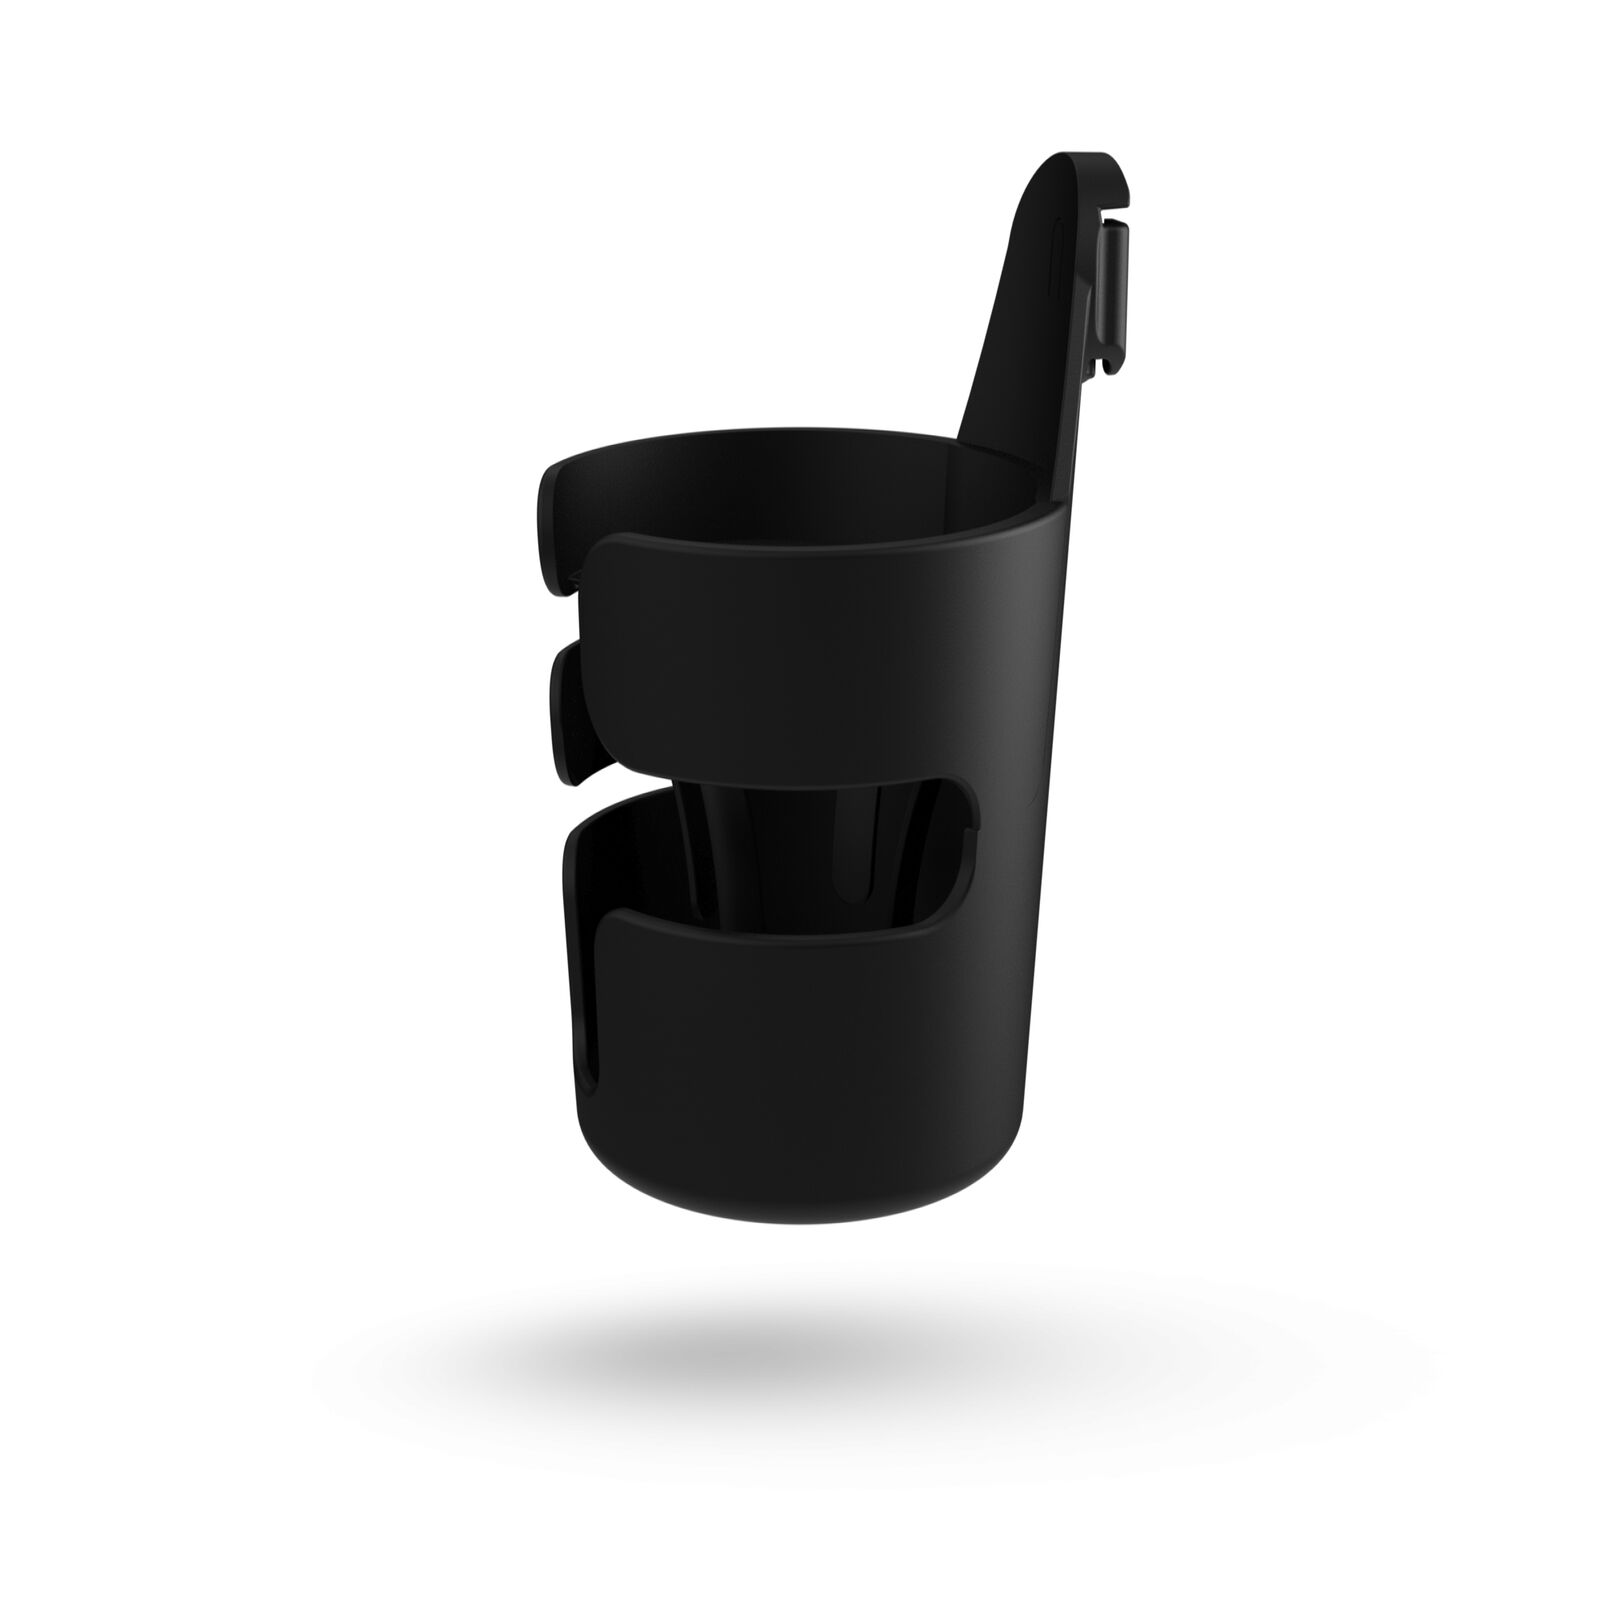 Bugaboo cup holder